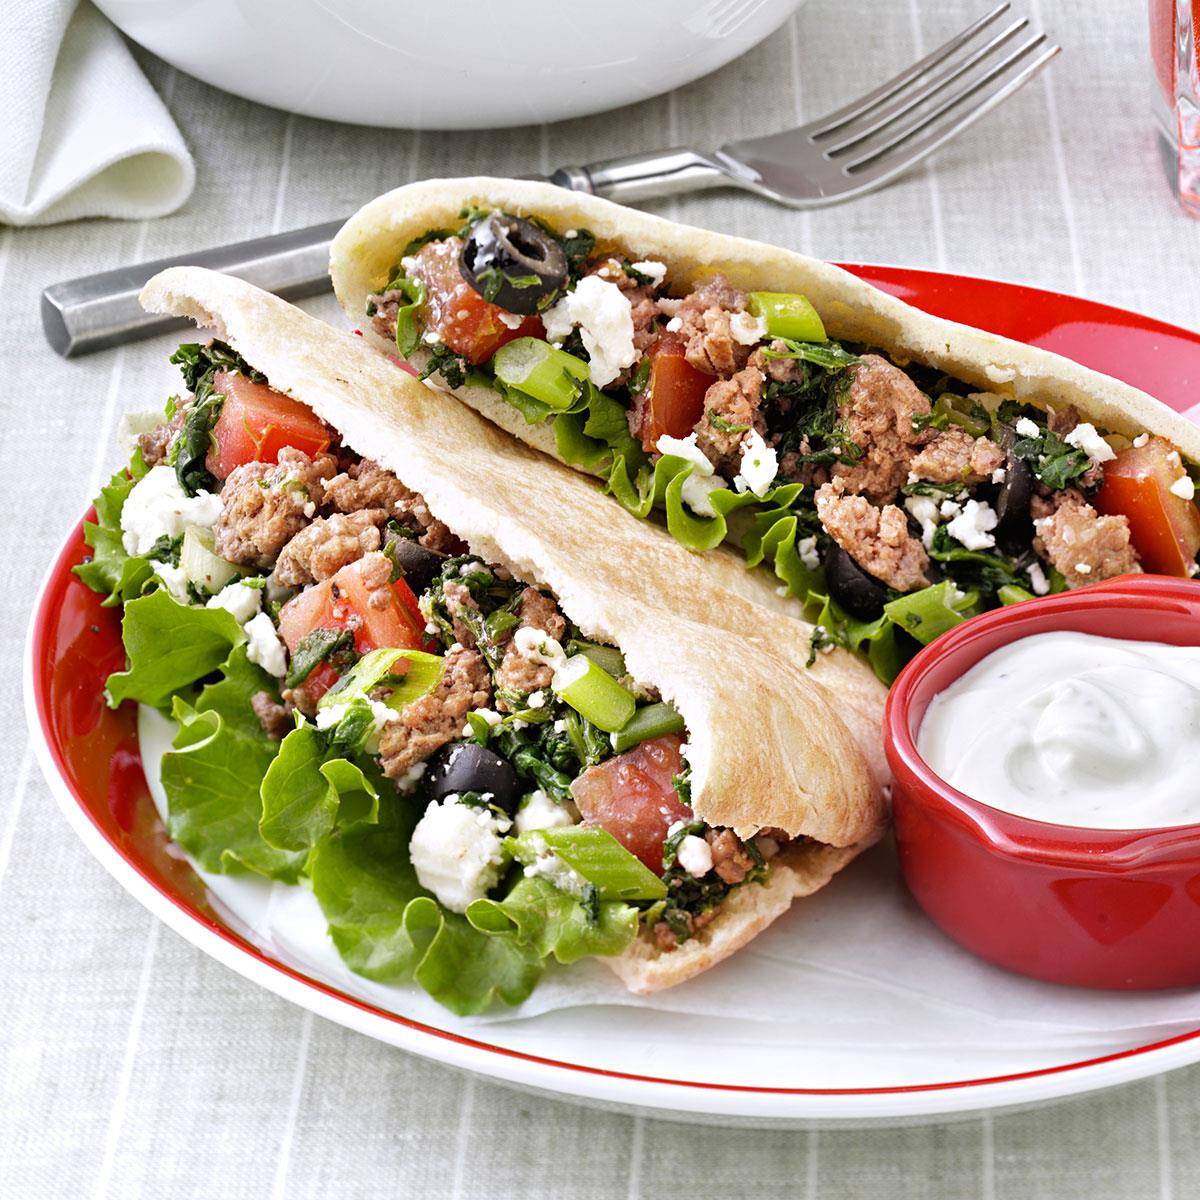 Beef Spinach Gyros Recipe Taste Of Home,Liberty Quarter Dollar Coin Value